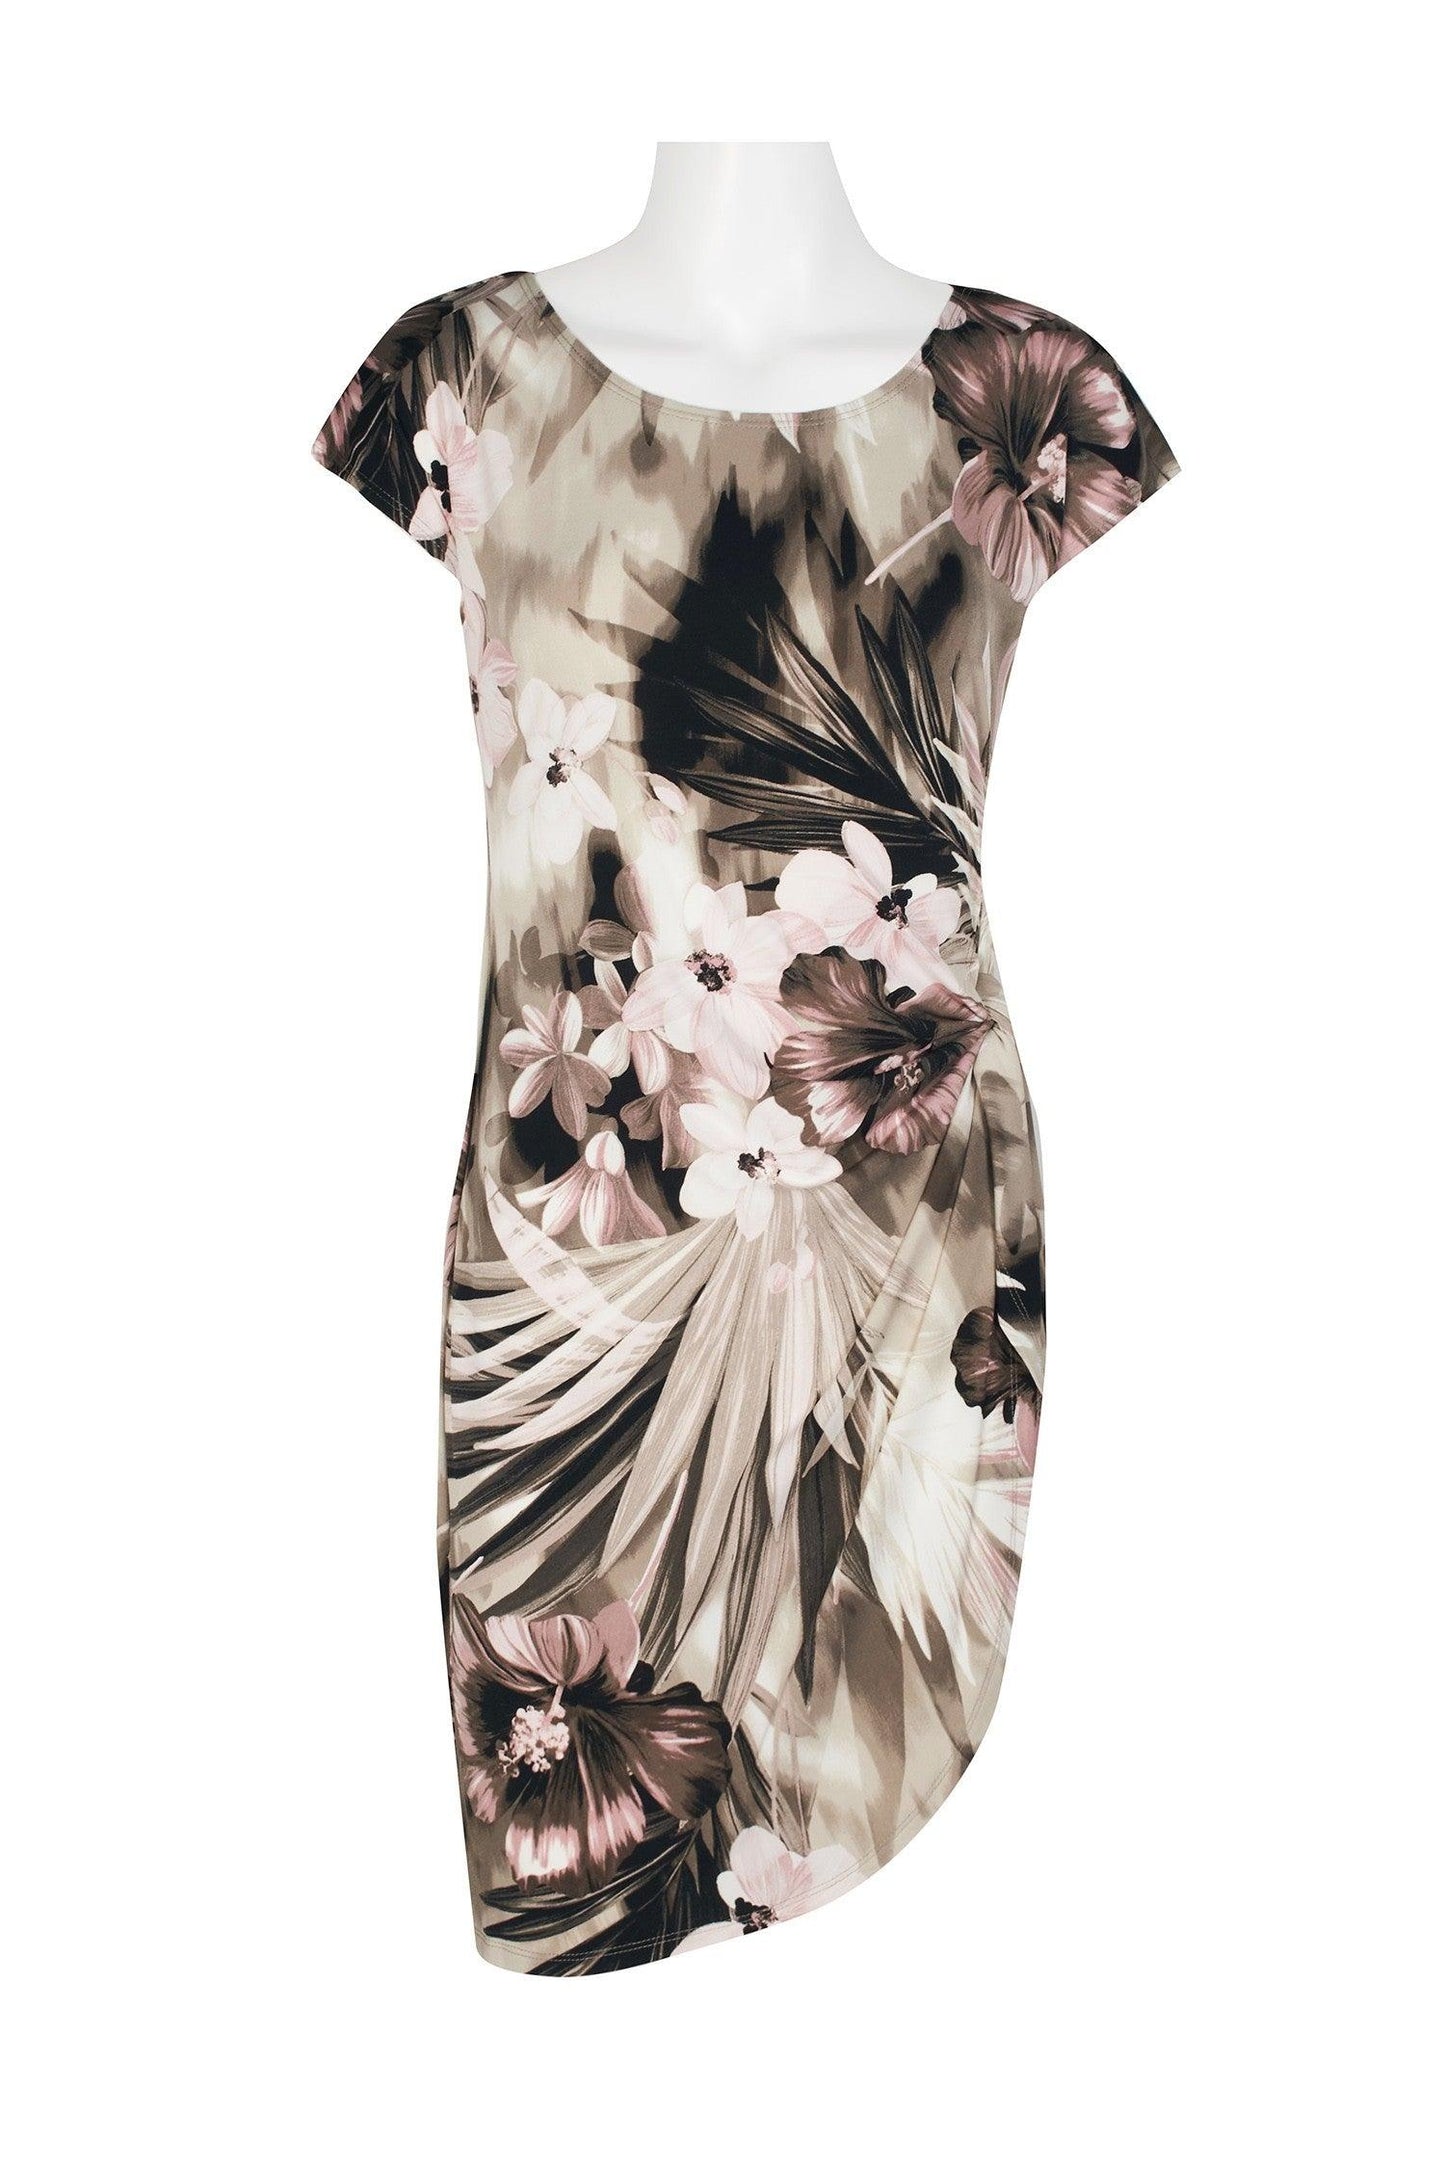 Connected Apparel Short Cap Sleeve Floral Dress - The Dress Outlet